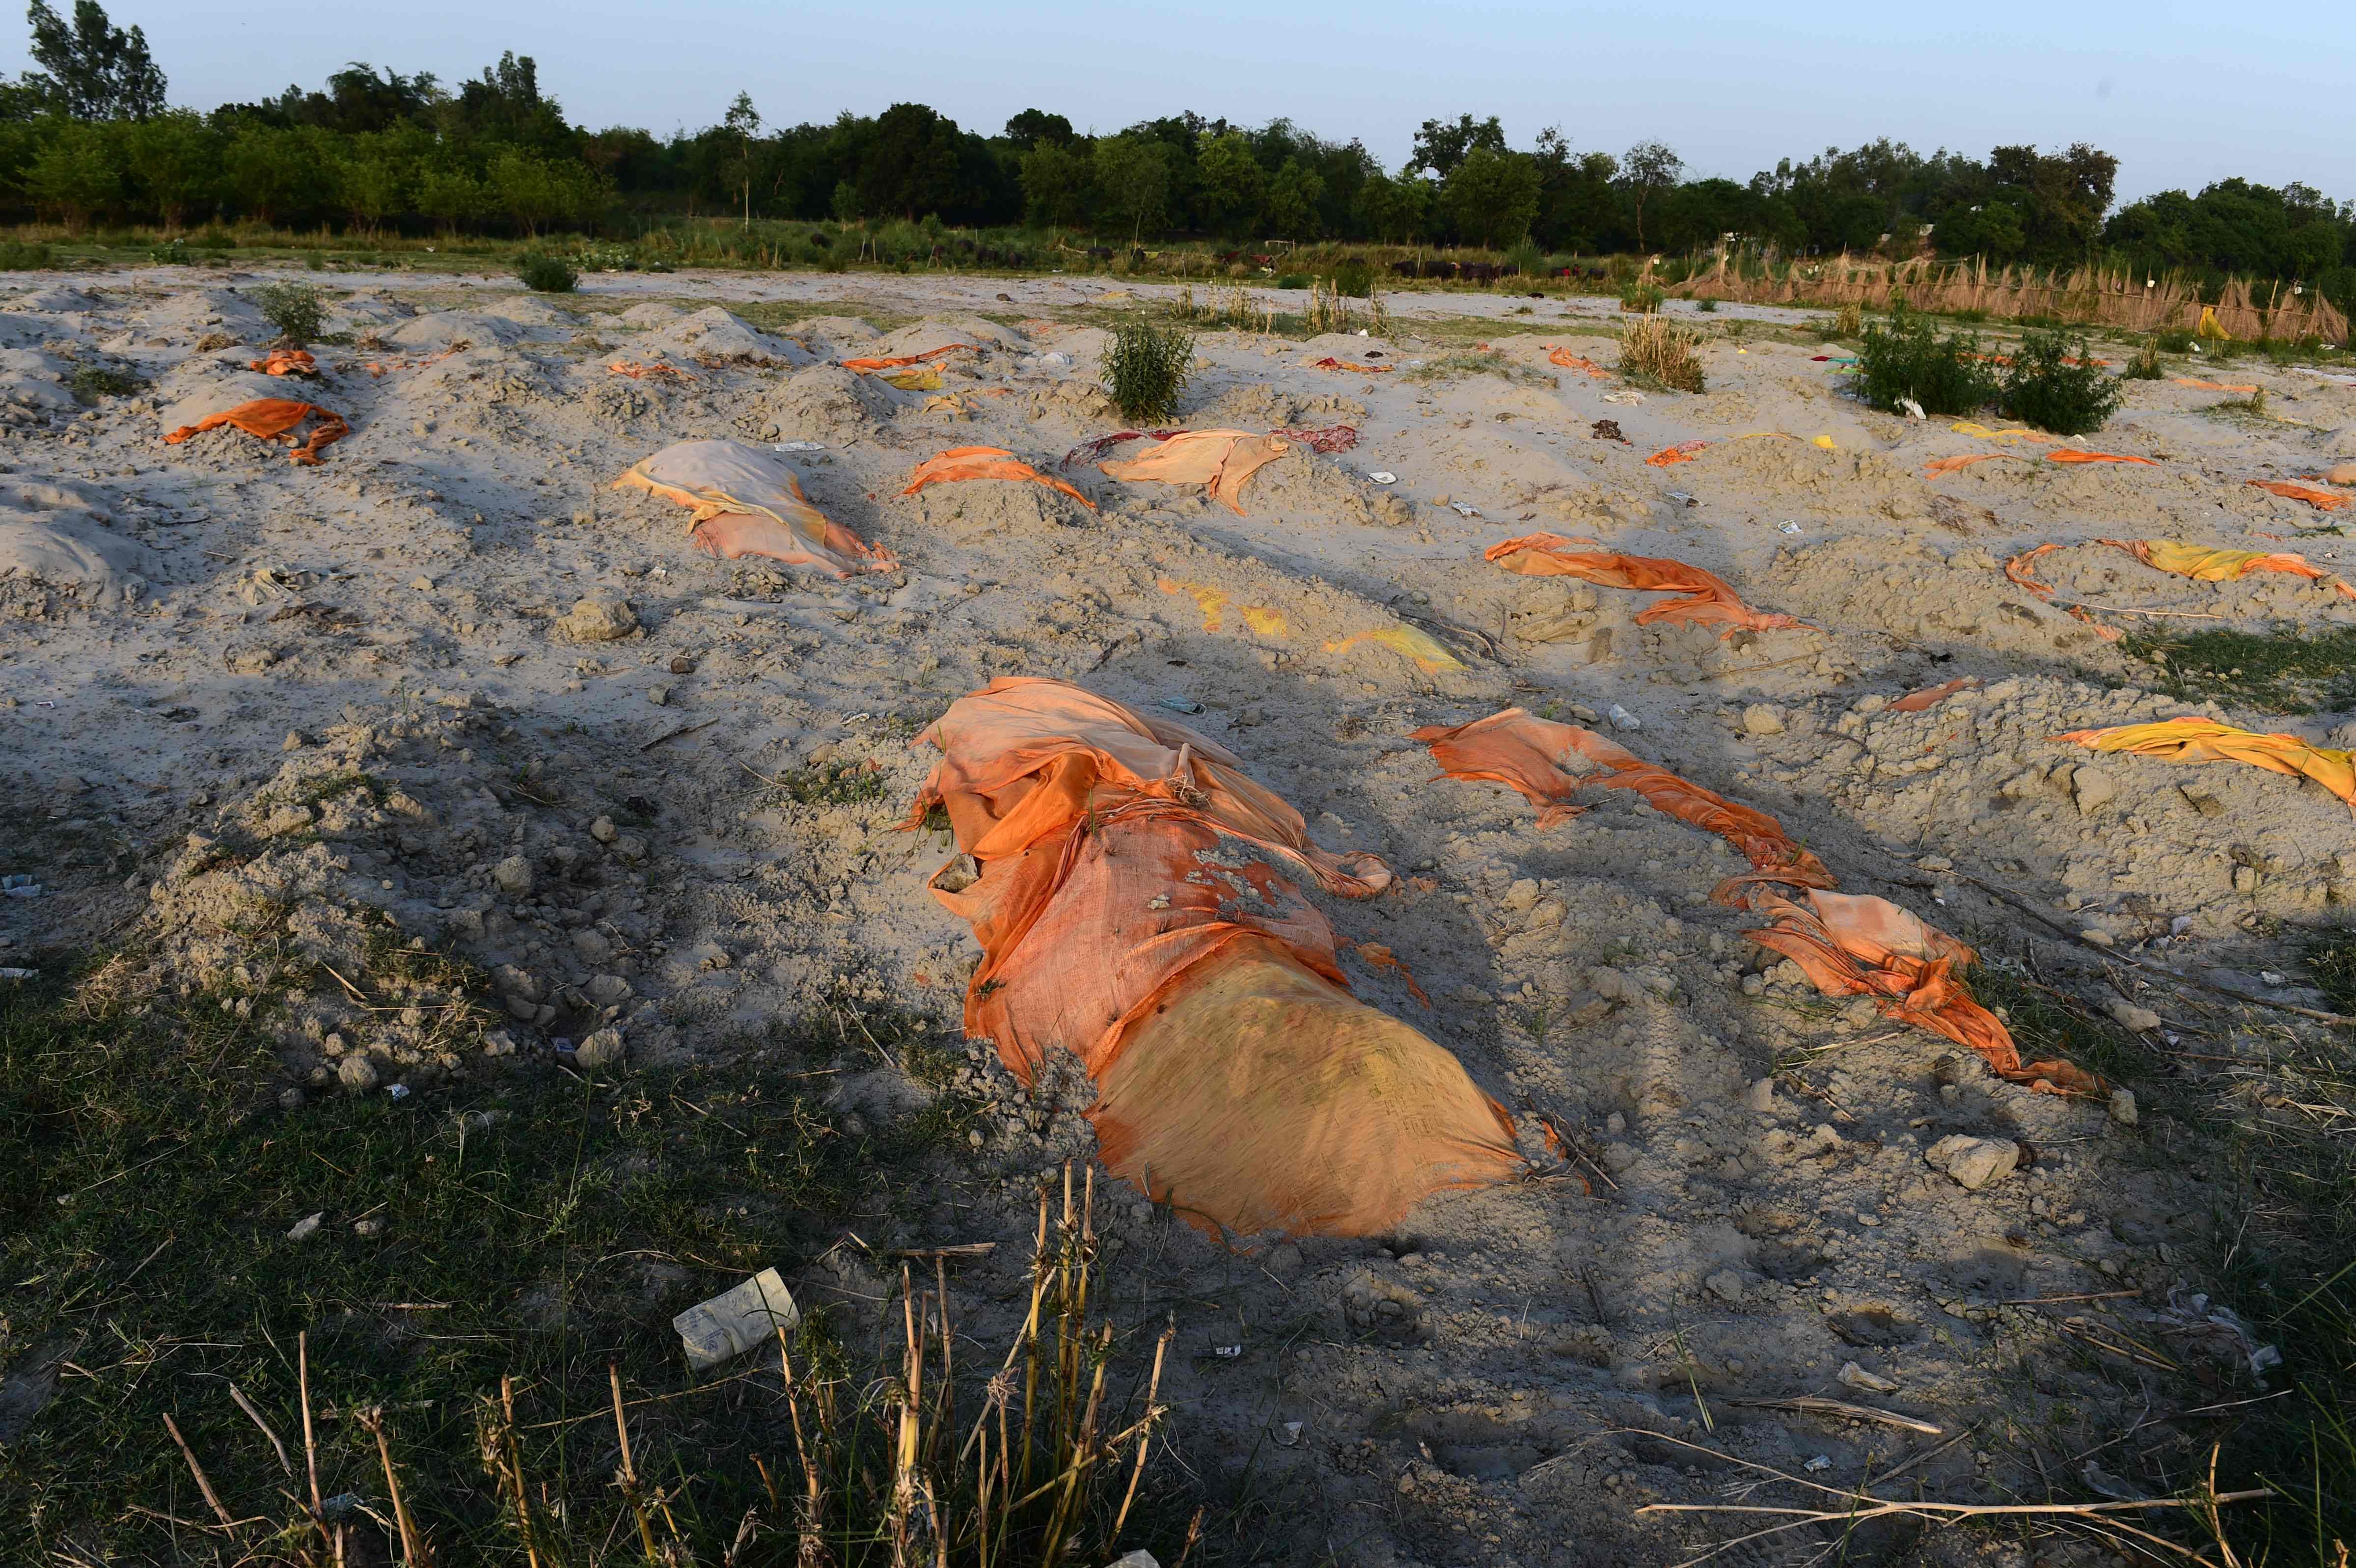 Bodies of suspected Covid-19 victims are seen partially buried in the sand near a cremation ground on the banks of the Ganges